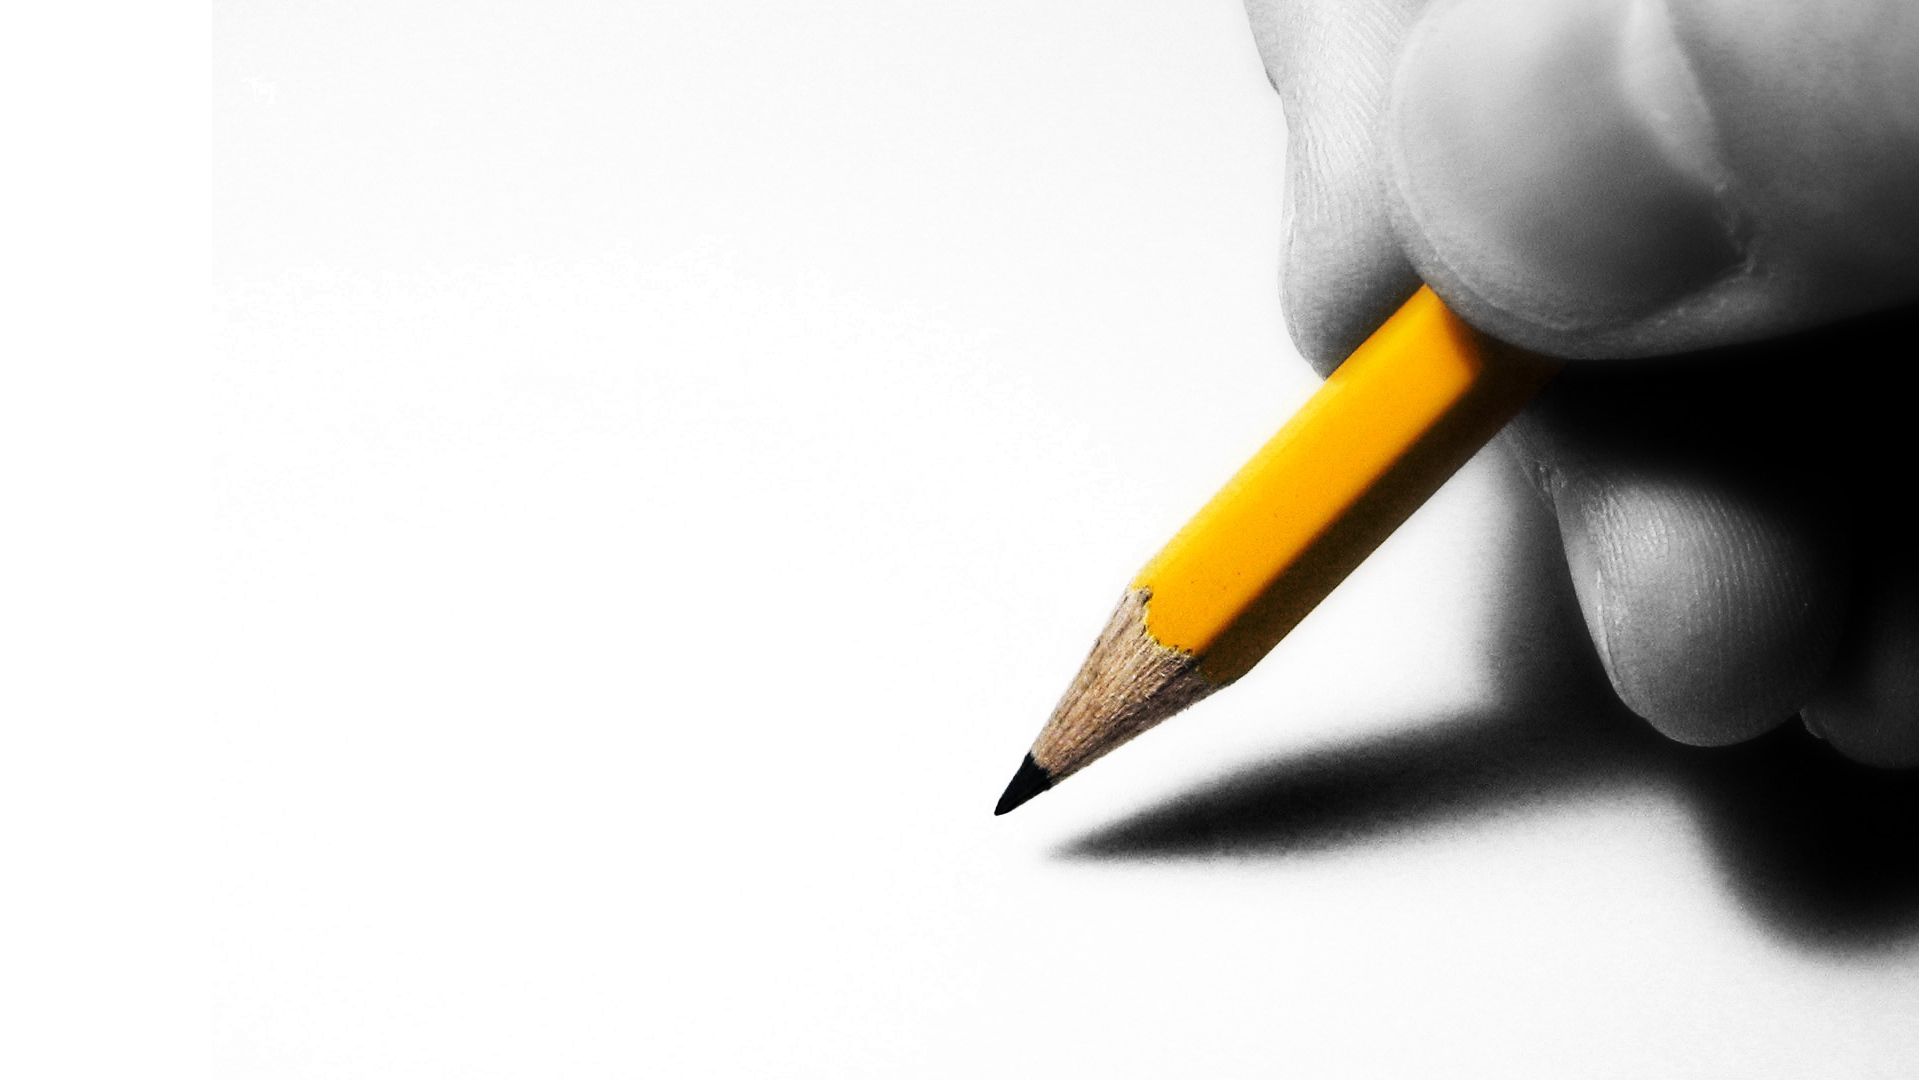 Download wallpaper 1920x1080 hand, pencil, drawing, sketch hd background